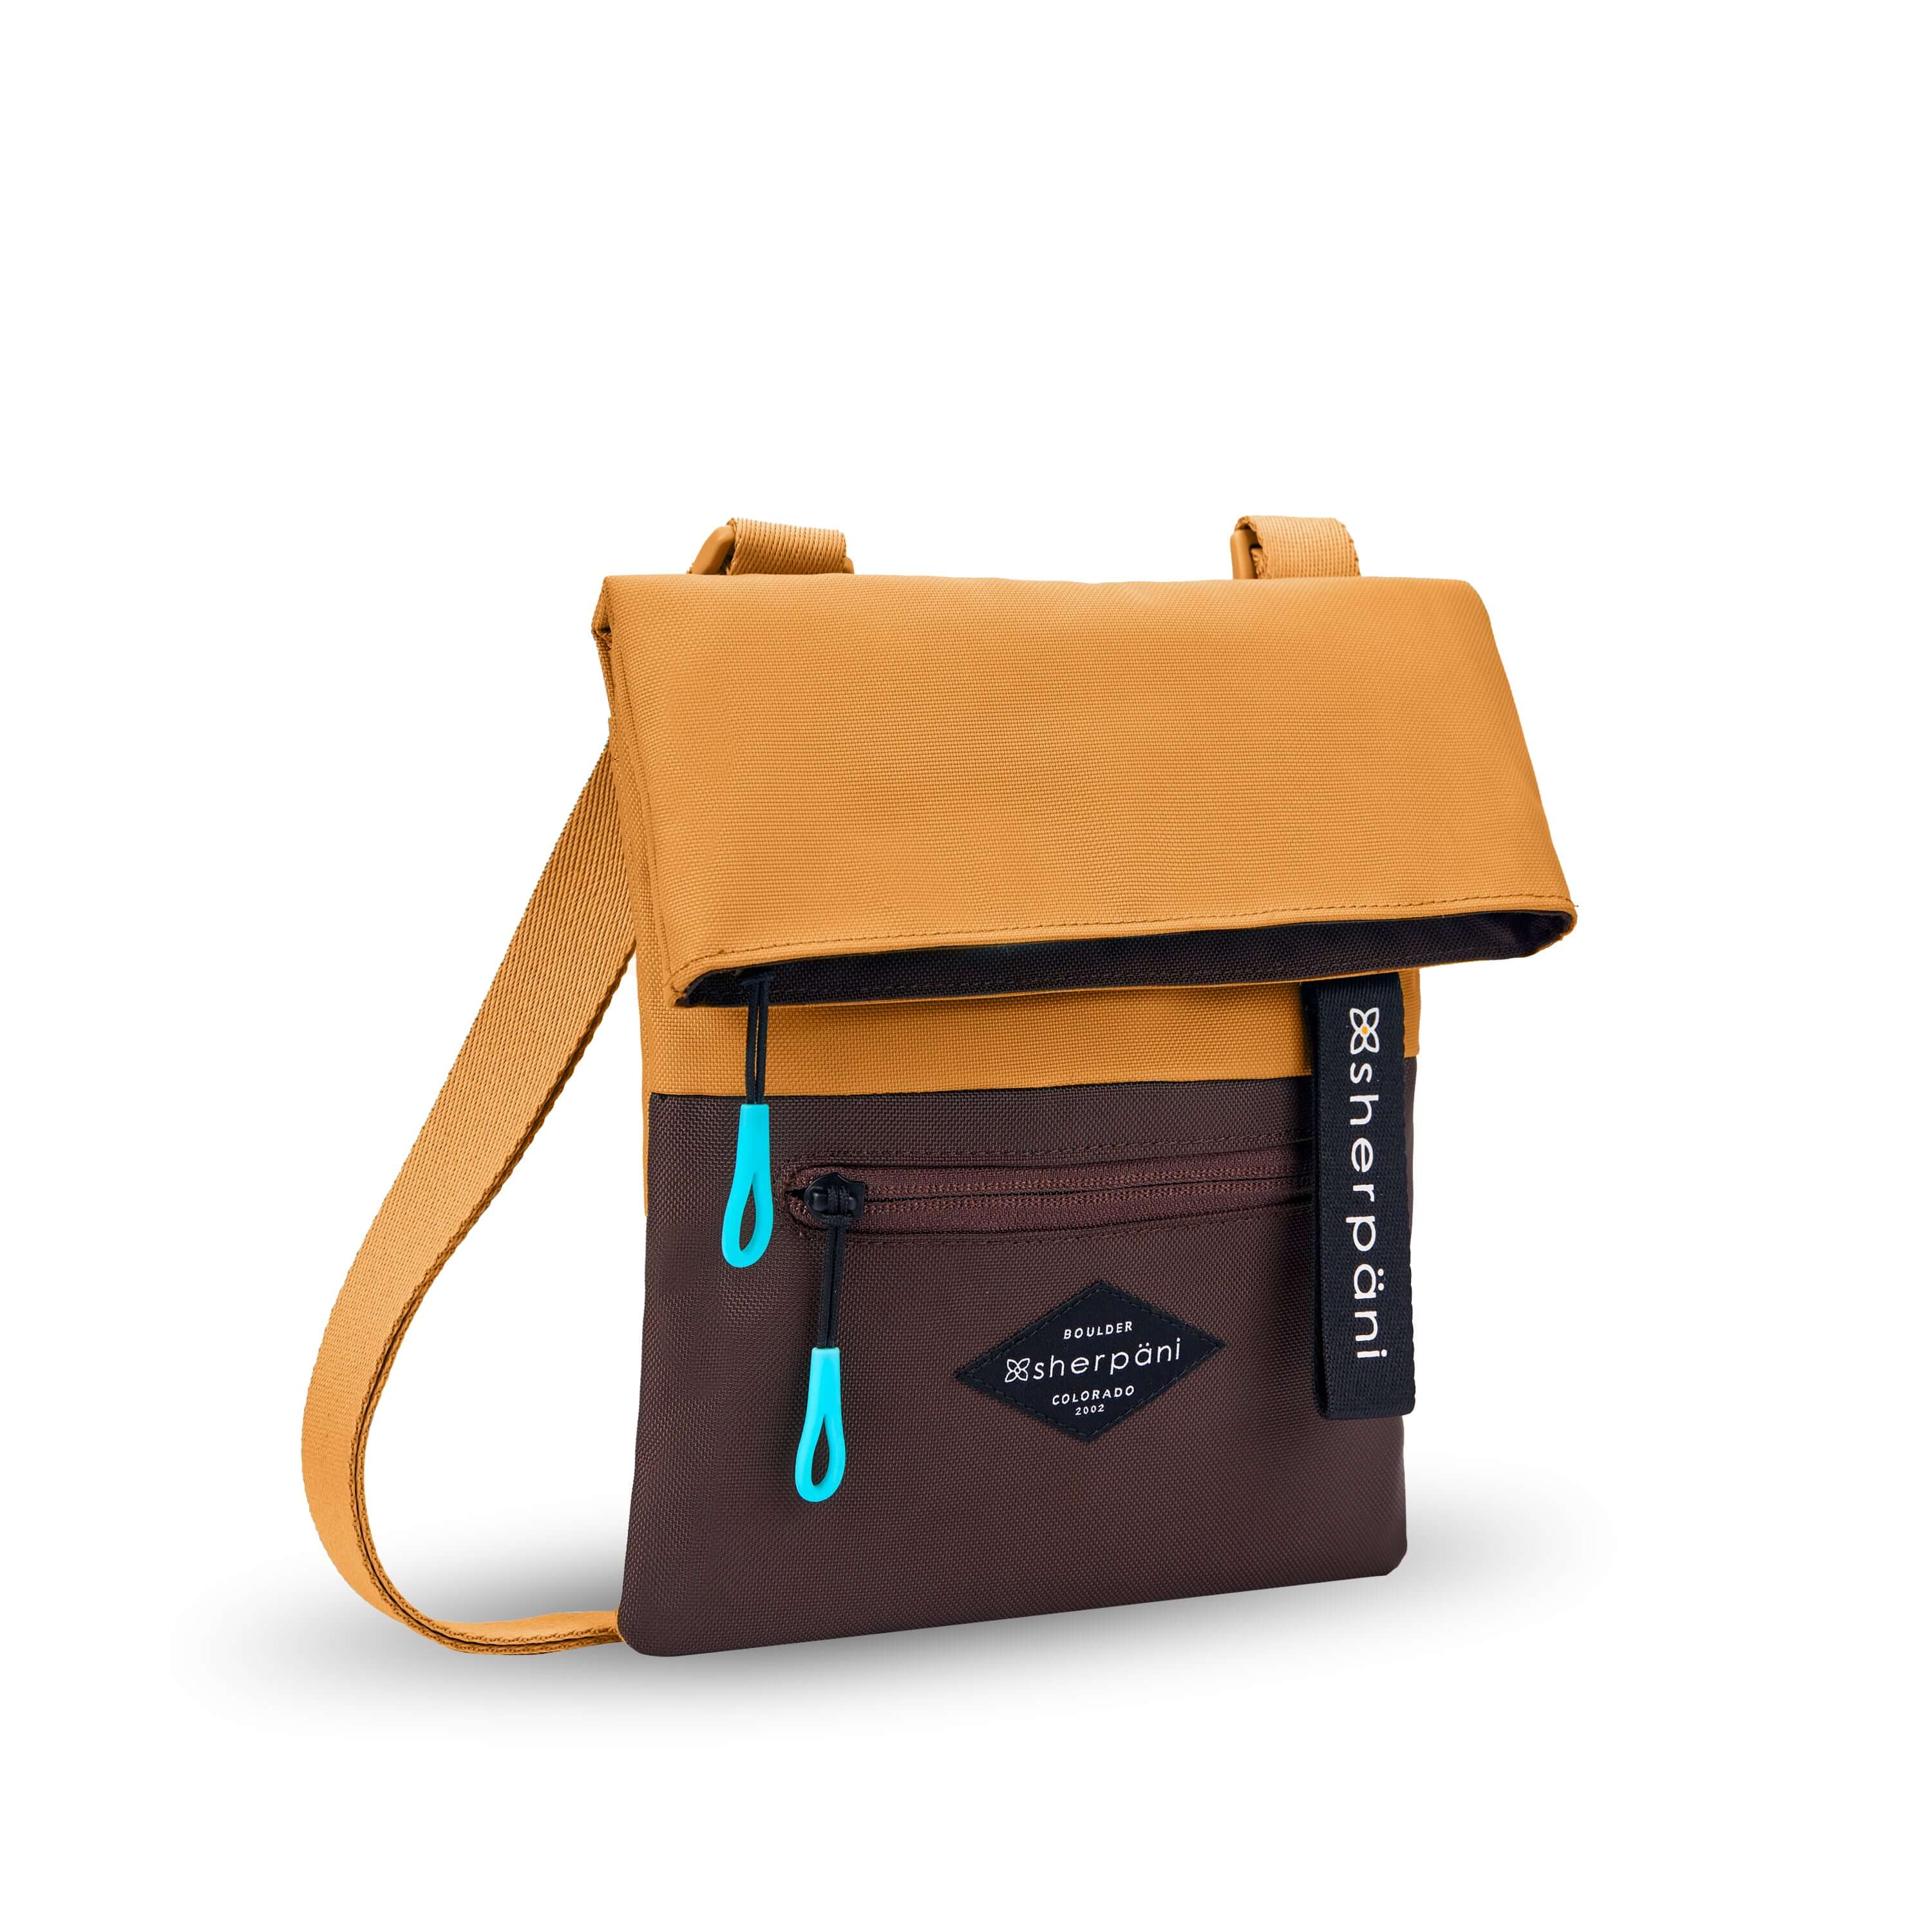 Angled front view of Sherpani crossbody, the Pica in Sundial. The bag is two toned: the top half is burnt yellow and the bottom half is brown. There is an external zipper pocket on the front panel. Easy pull zippers are accented in aqua. The top of the bag folds over creating a signature look. A branded Sherpani keychain is clipped to the upper right corner. The bag has an adjustable crossbody strap. #color_sundial v1